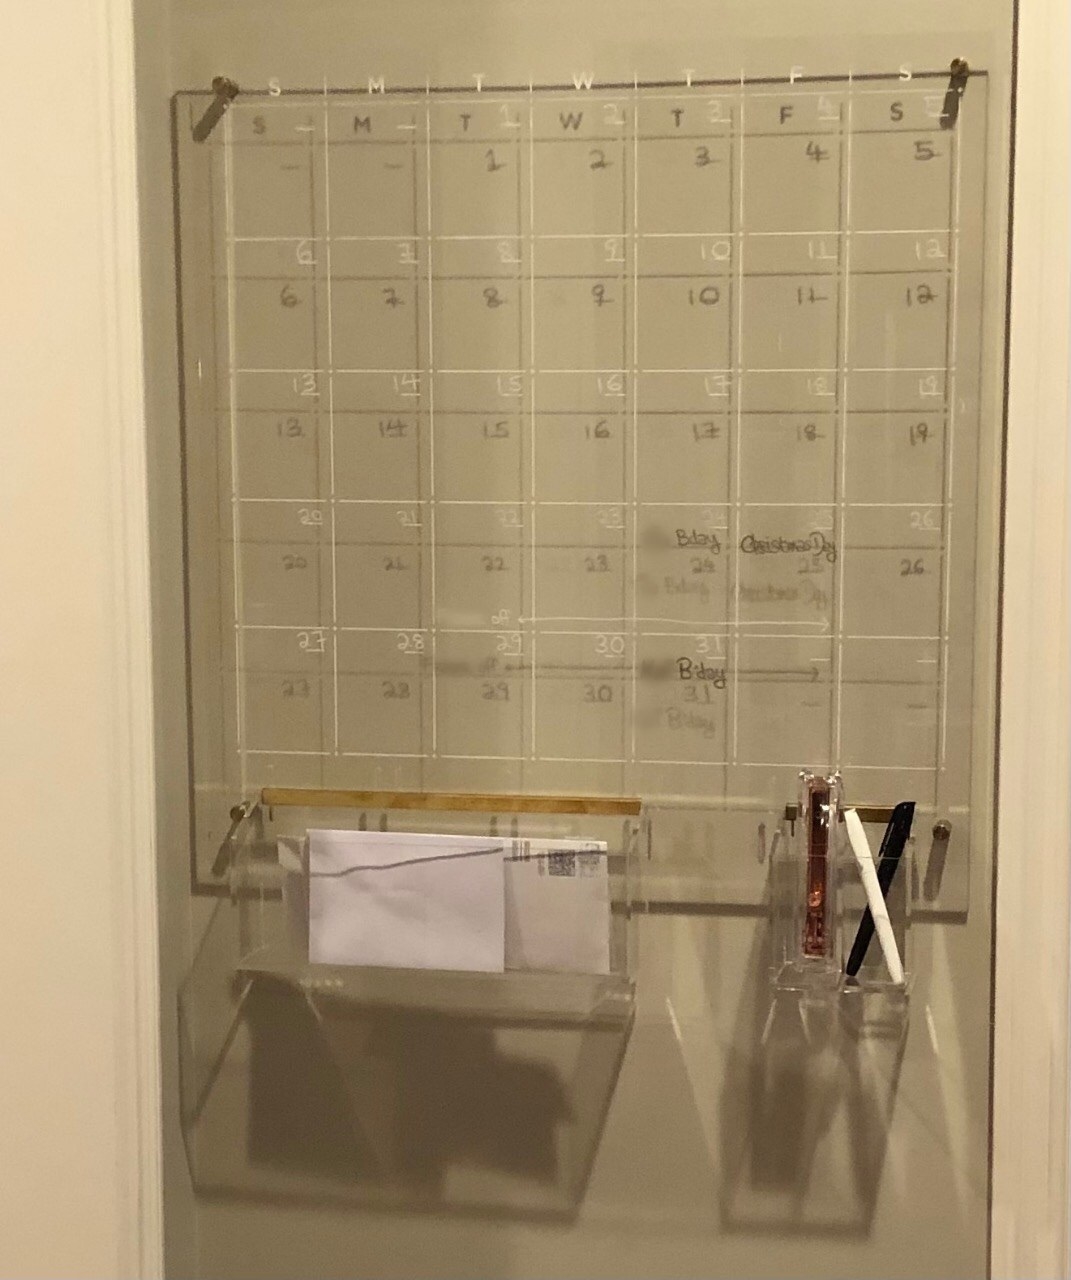 reviewer image of the square clear calendar hanging on the wall, showing a schedule for the month